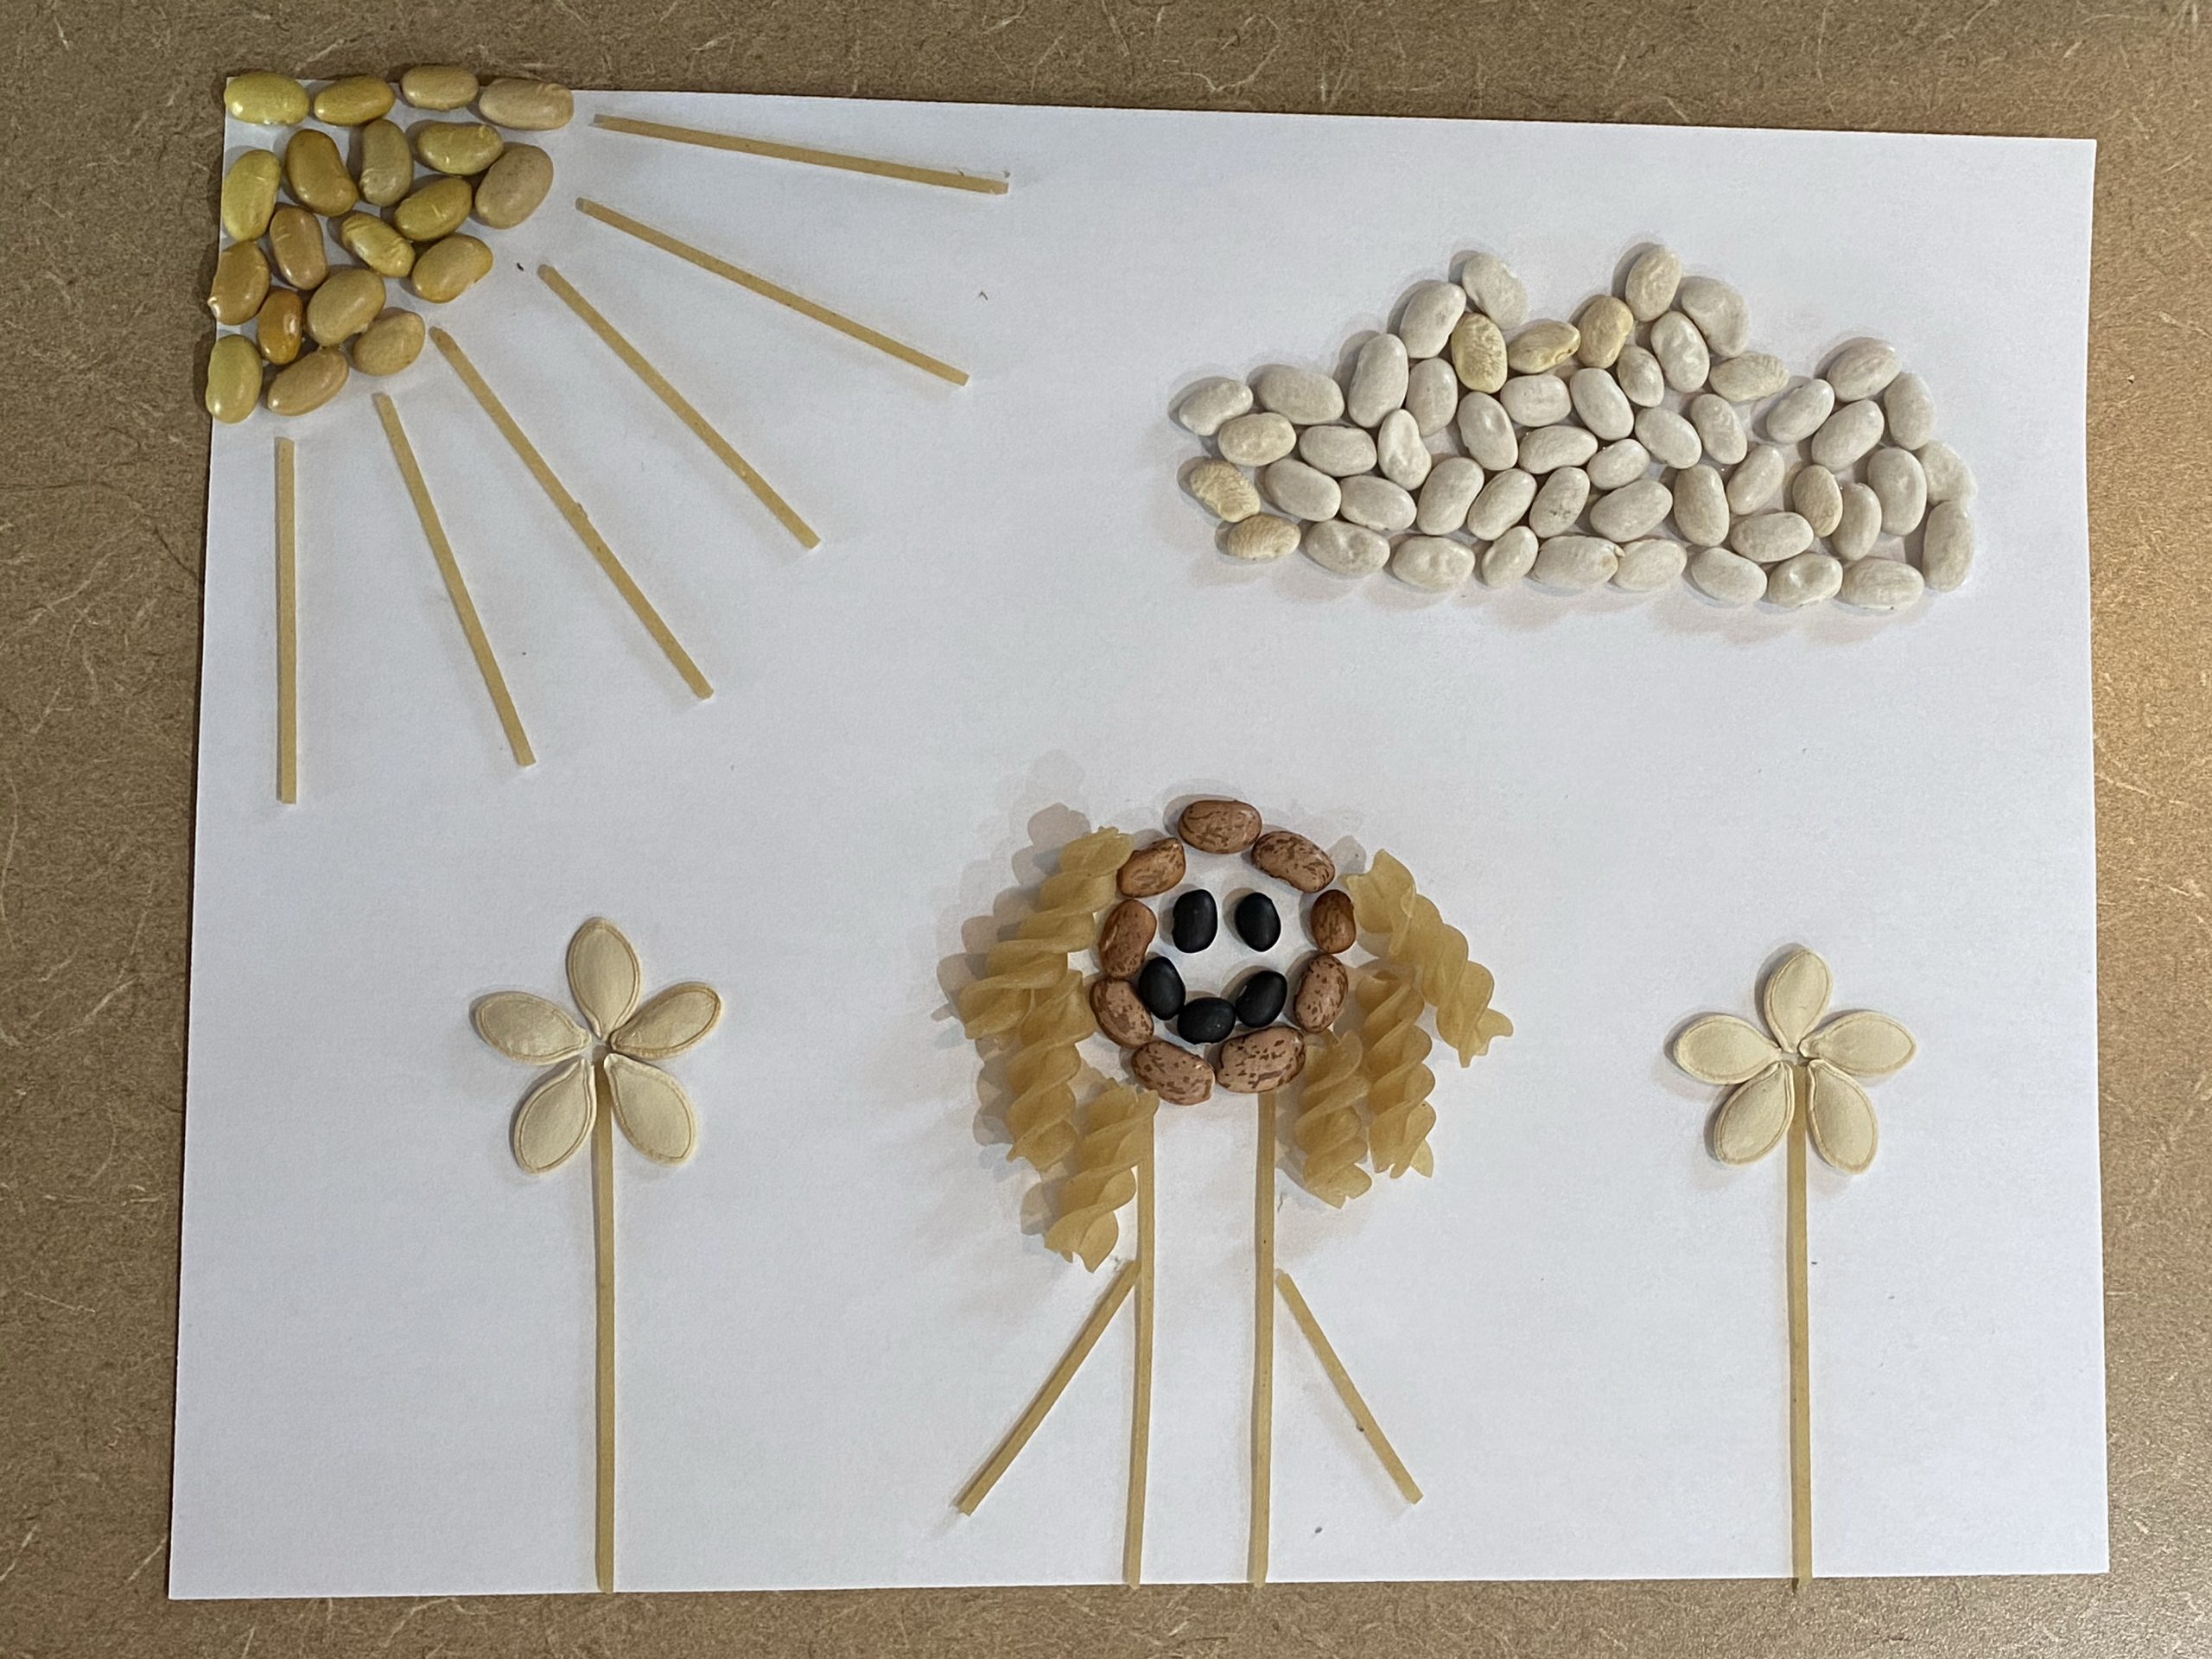 Bean, Seed, and Noodle Art Activity - Polishing Arrows